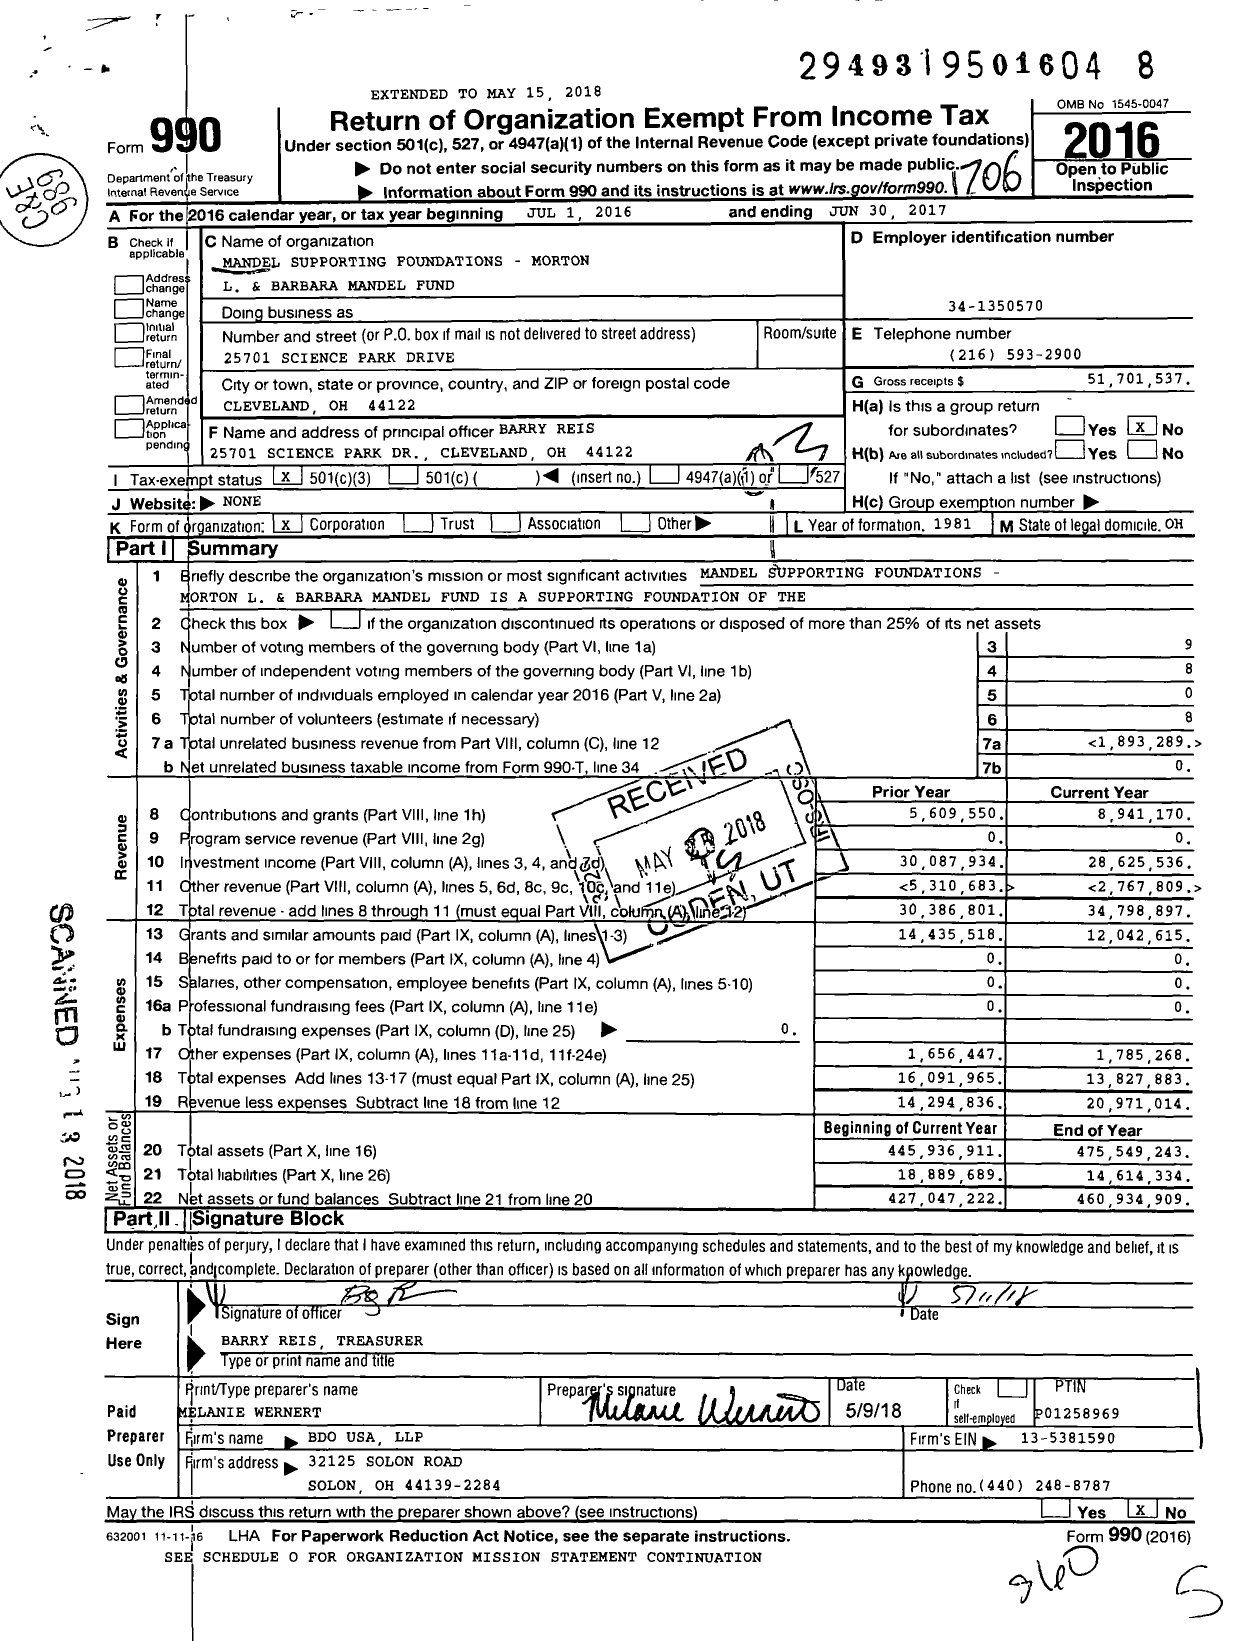 Image of first page of 2016 Form 990 for Mandel Supporting Foundations Morton L and Barbara Mandel Fund